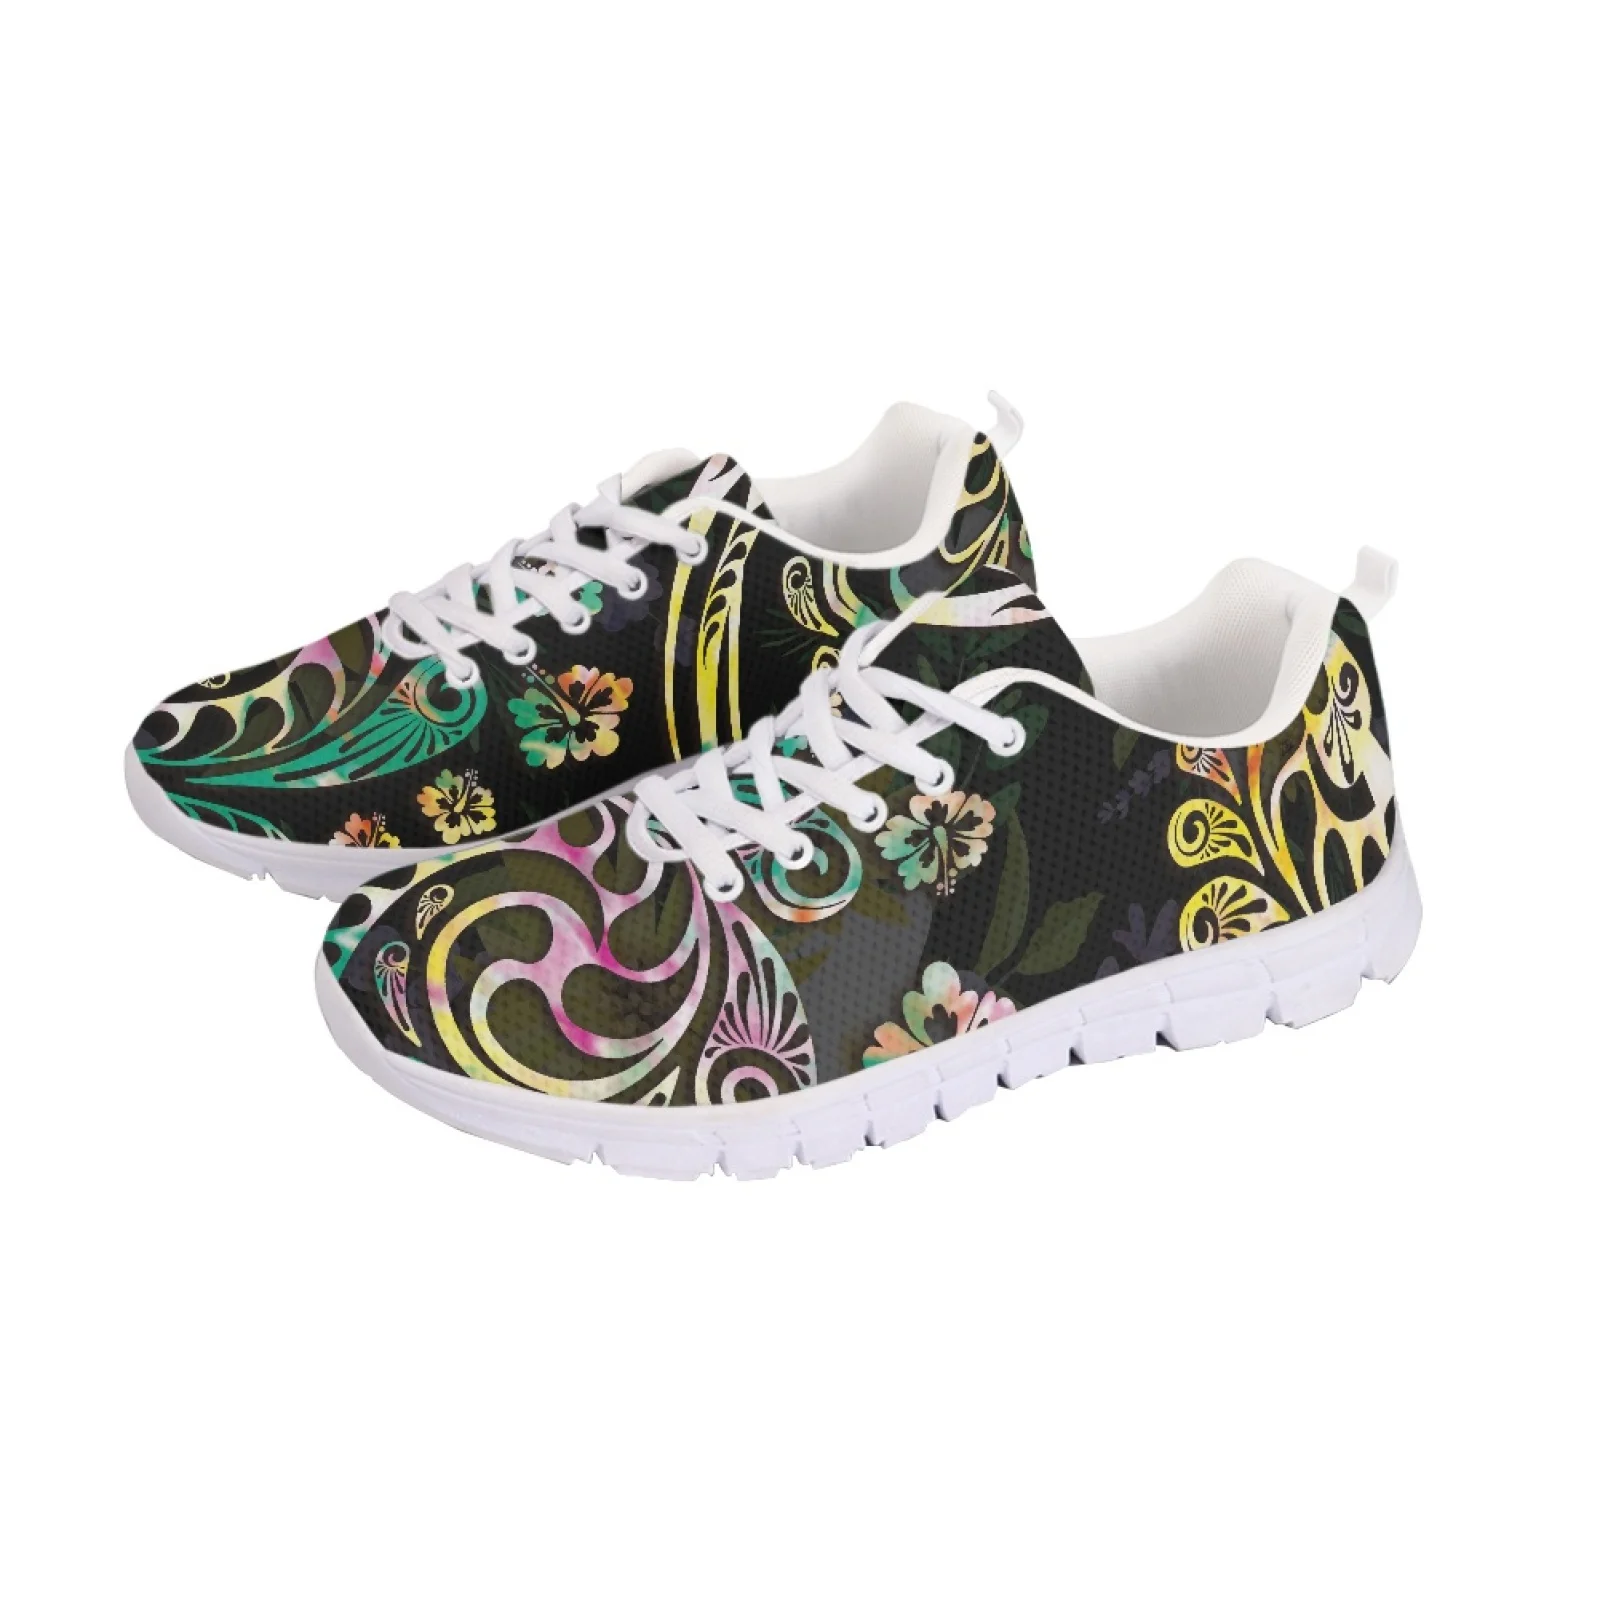 

Polynesian Tribal Fijian Totem Tattoo Fiji Prints Superlight Lace-Up Soft-Soled Trainers Comfort Breathable Mesh Running Shoes